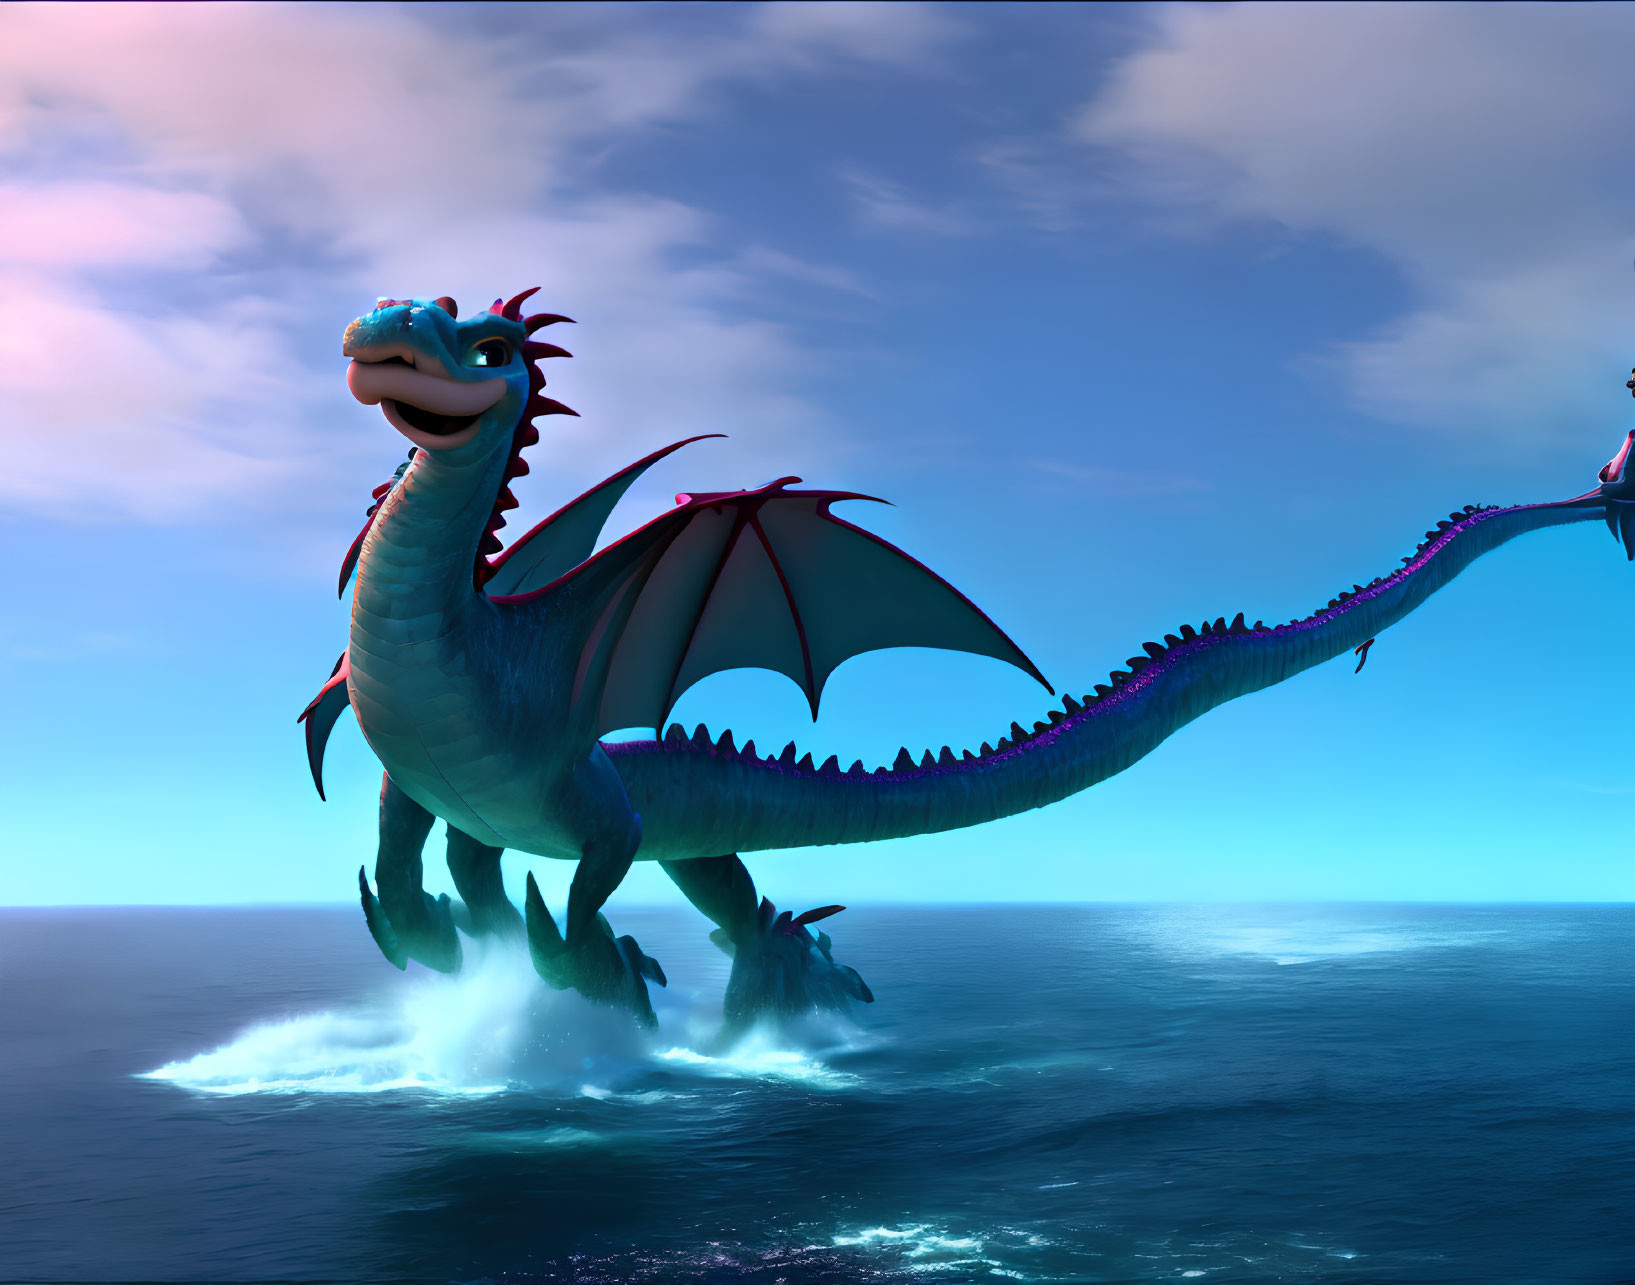 Blue-scaled animated dragon with red wings over ocean and clear sky